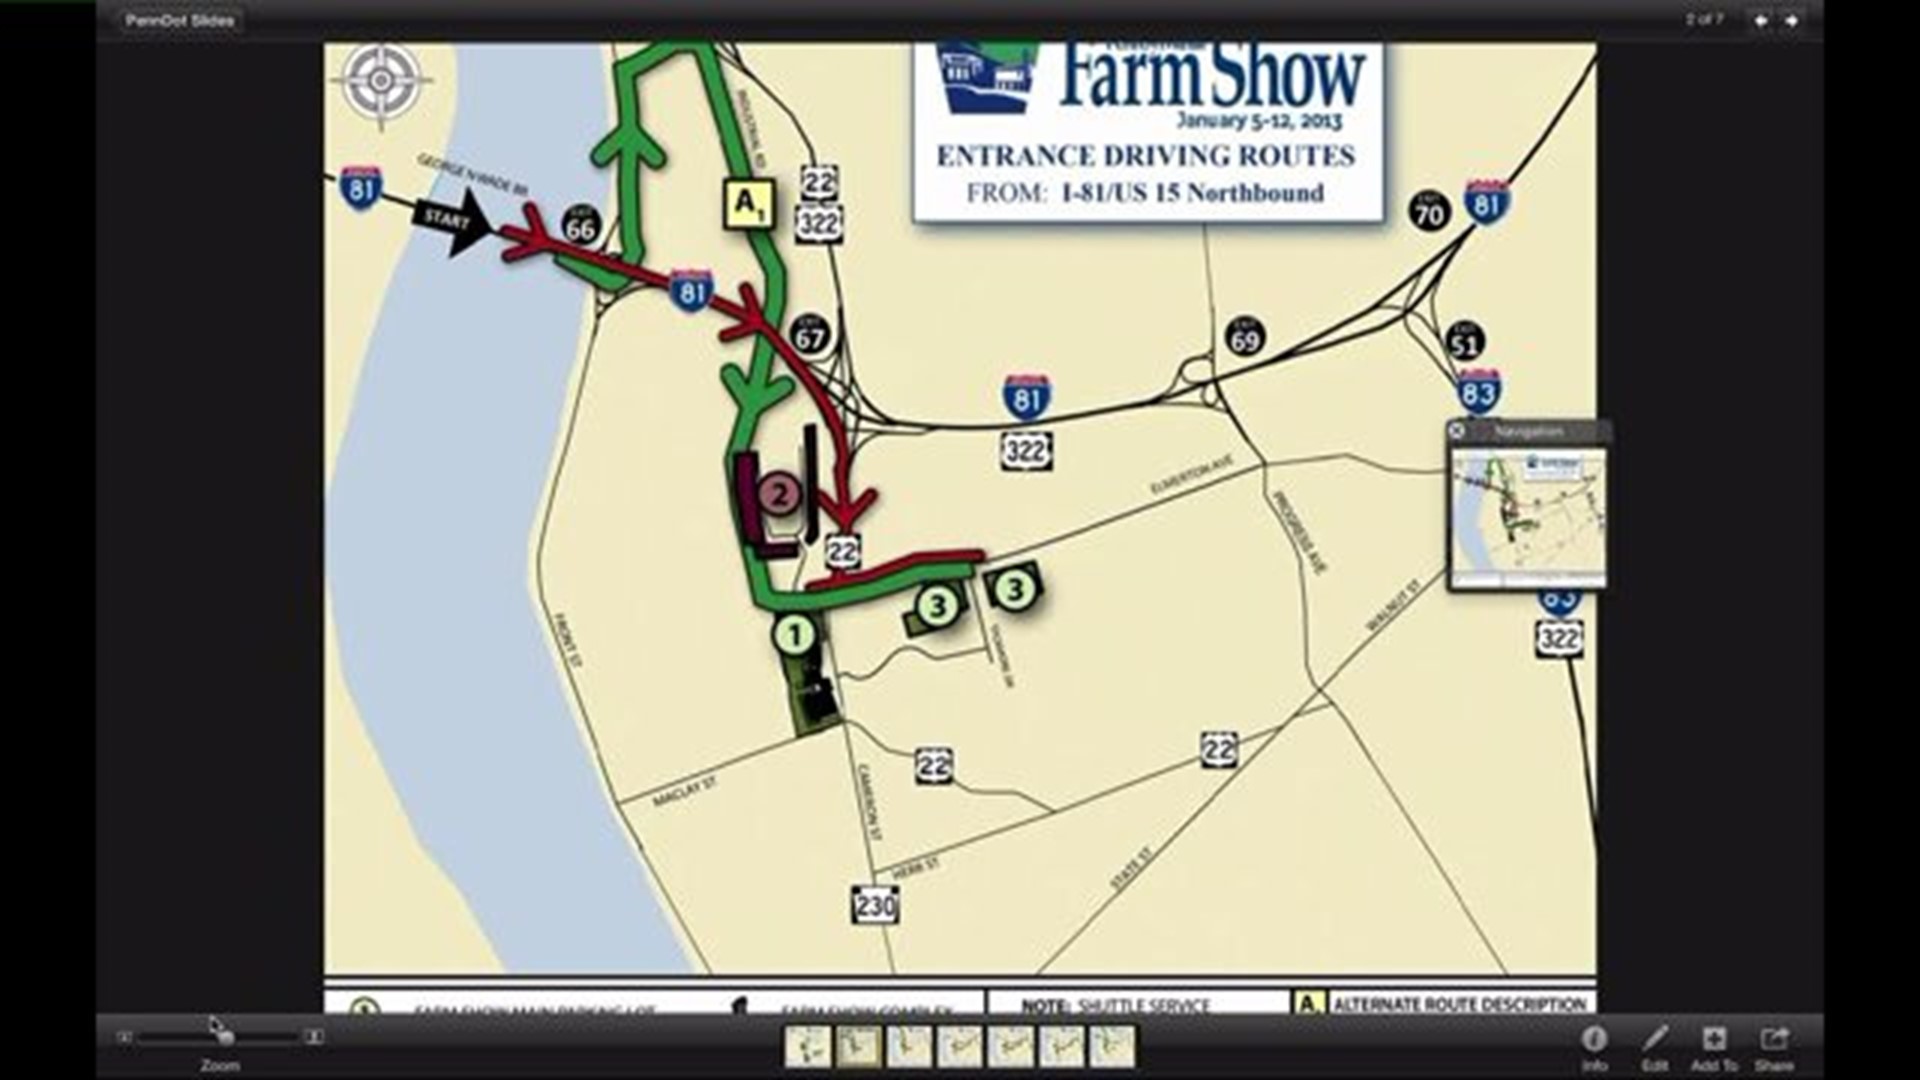 What you need to know about Farm Show traffic